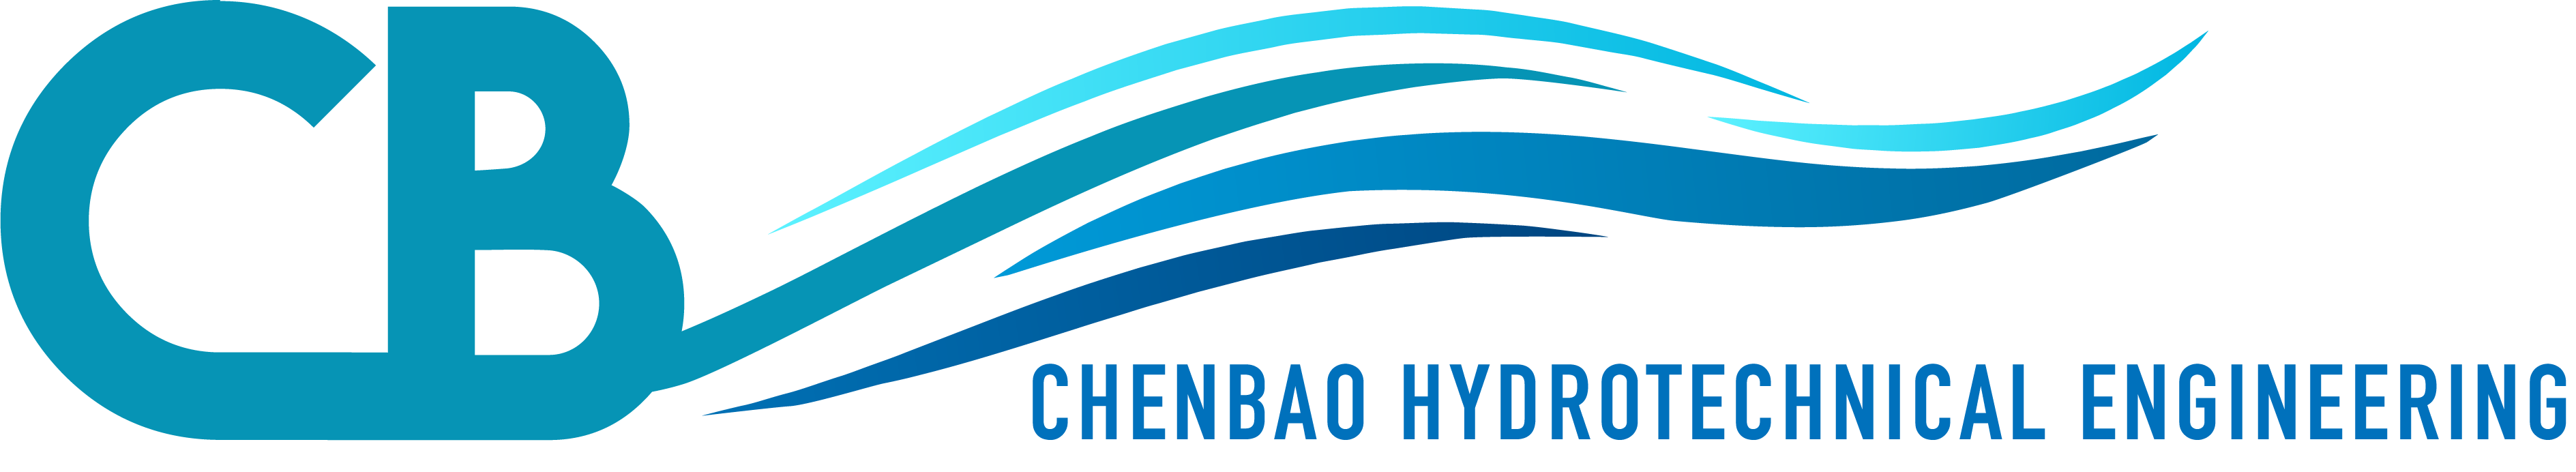 ChenBao Hydroelectrical Engineering